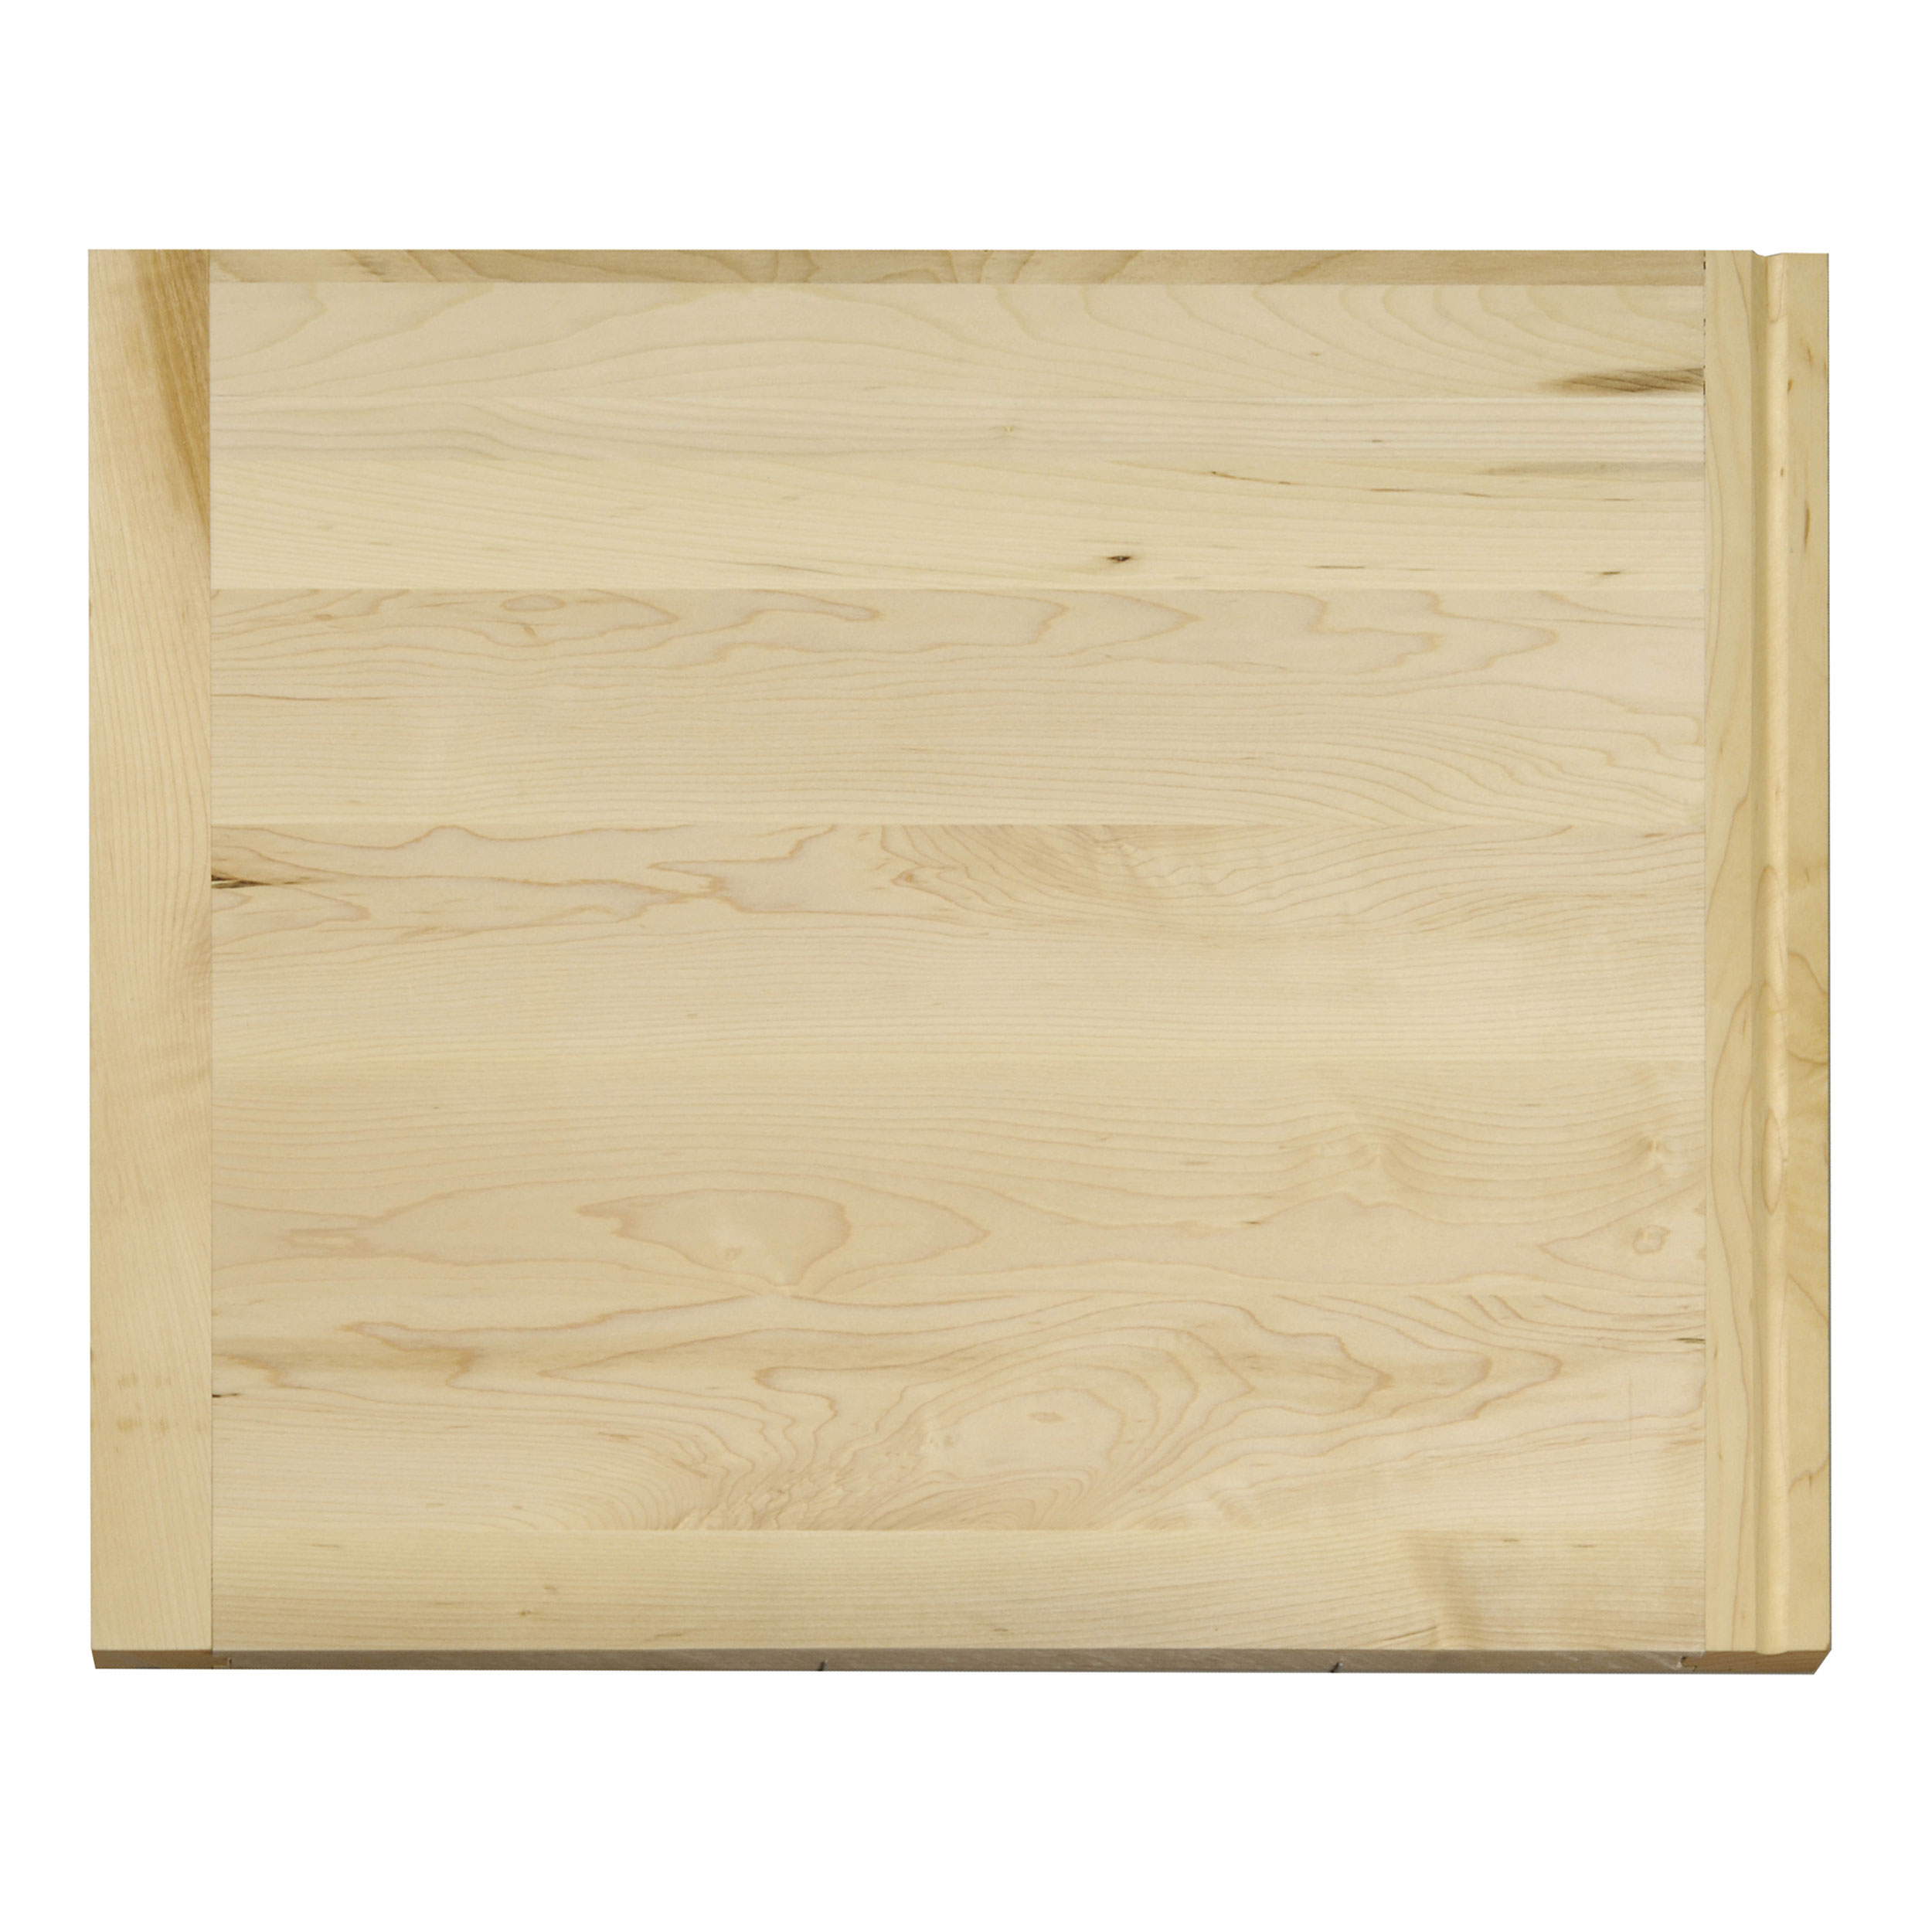 18 X 22 Inch X 3/4 Inch Thick Hardwood Cutting Board With Routed Pull-out